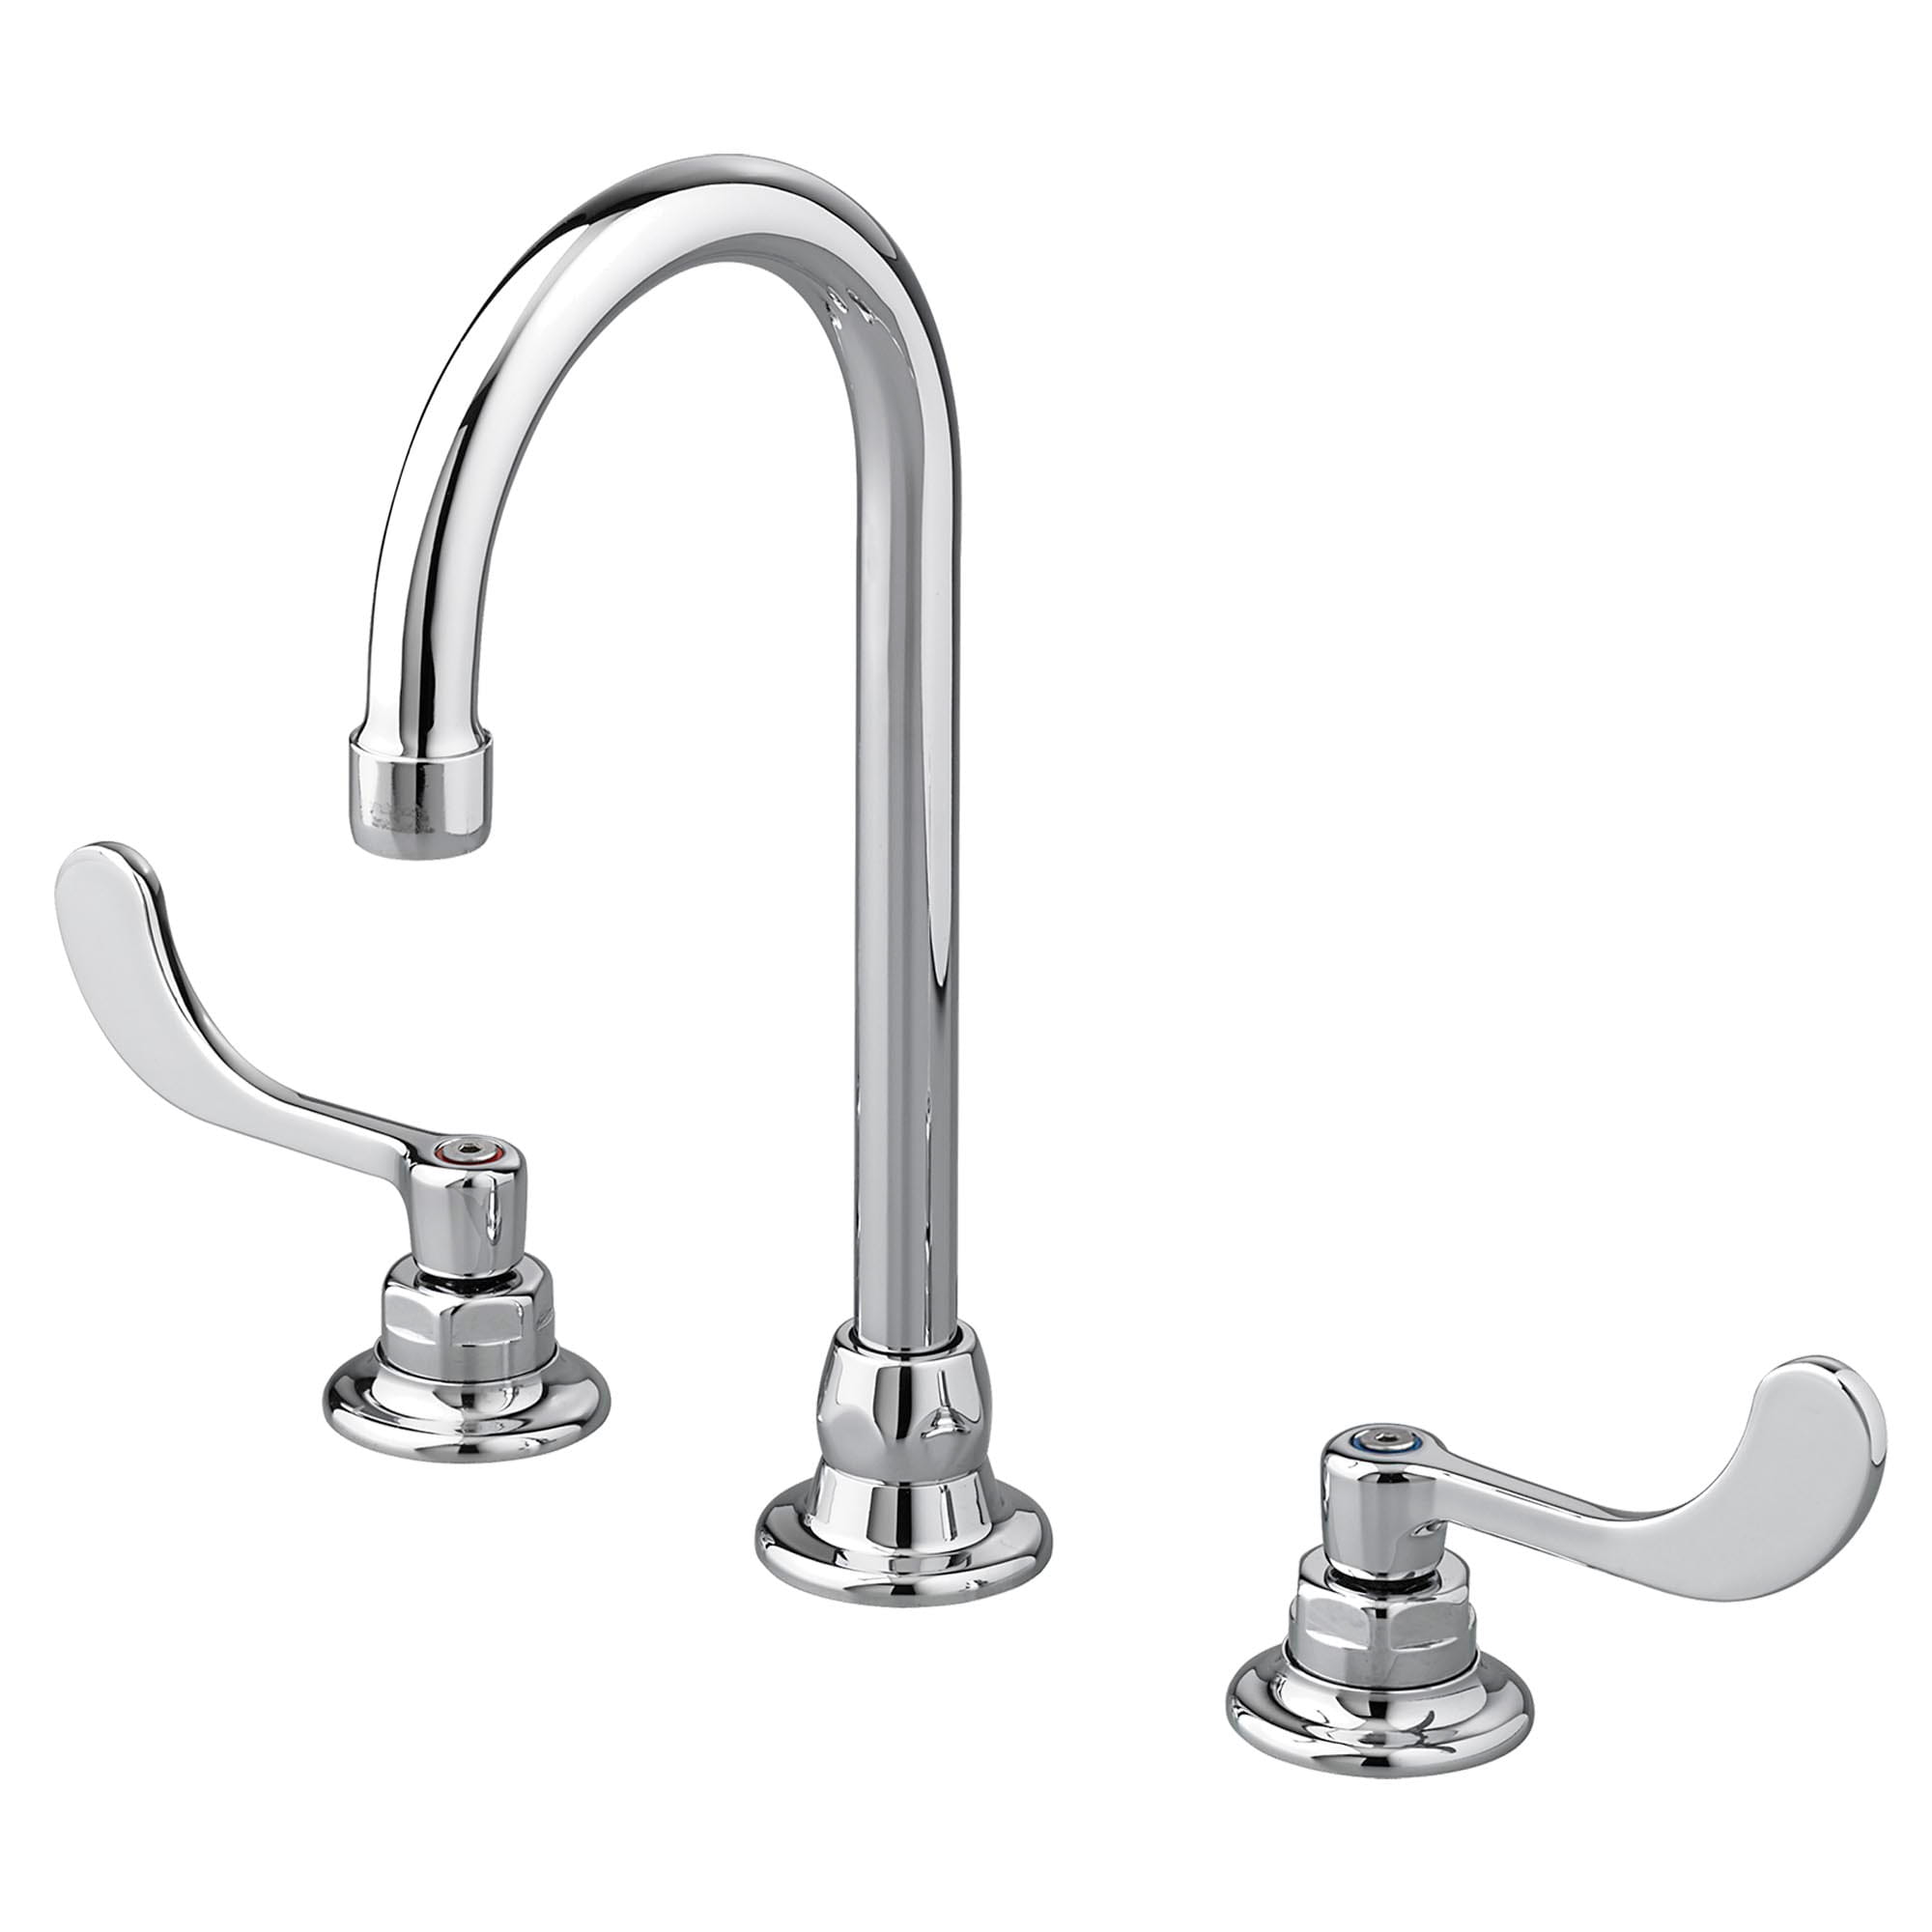 Monterrey® 8-Inch Widespread Gooseneck Faucet With Wrist Blade Handles 1.5 gpm/5.7 Lpm With Limited Swivel